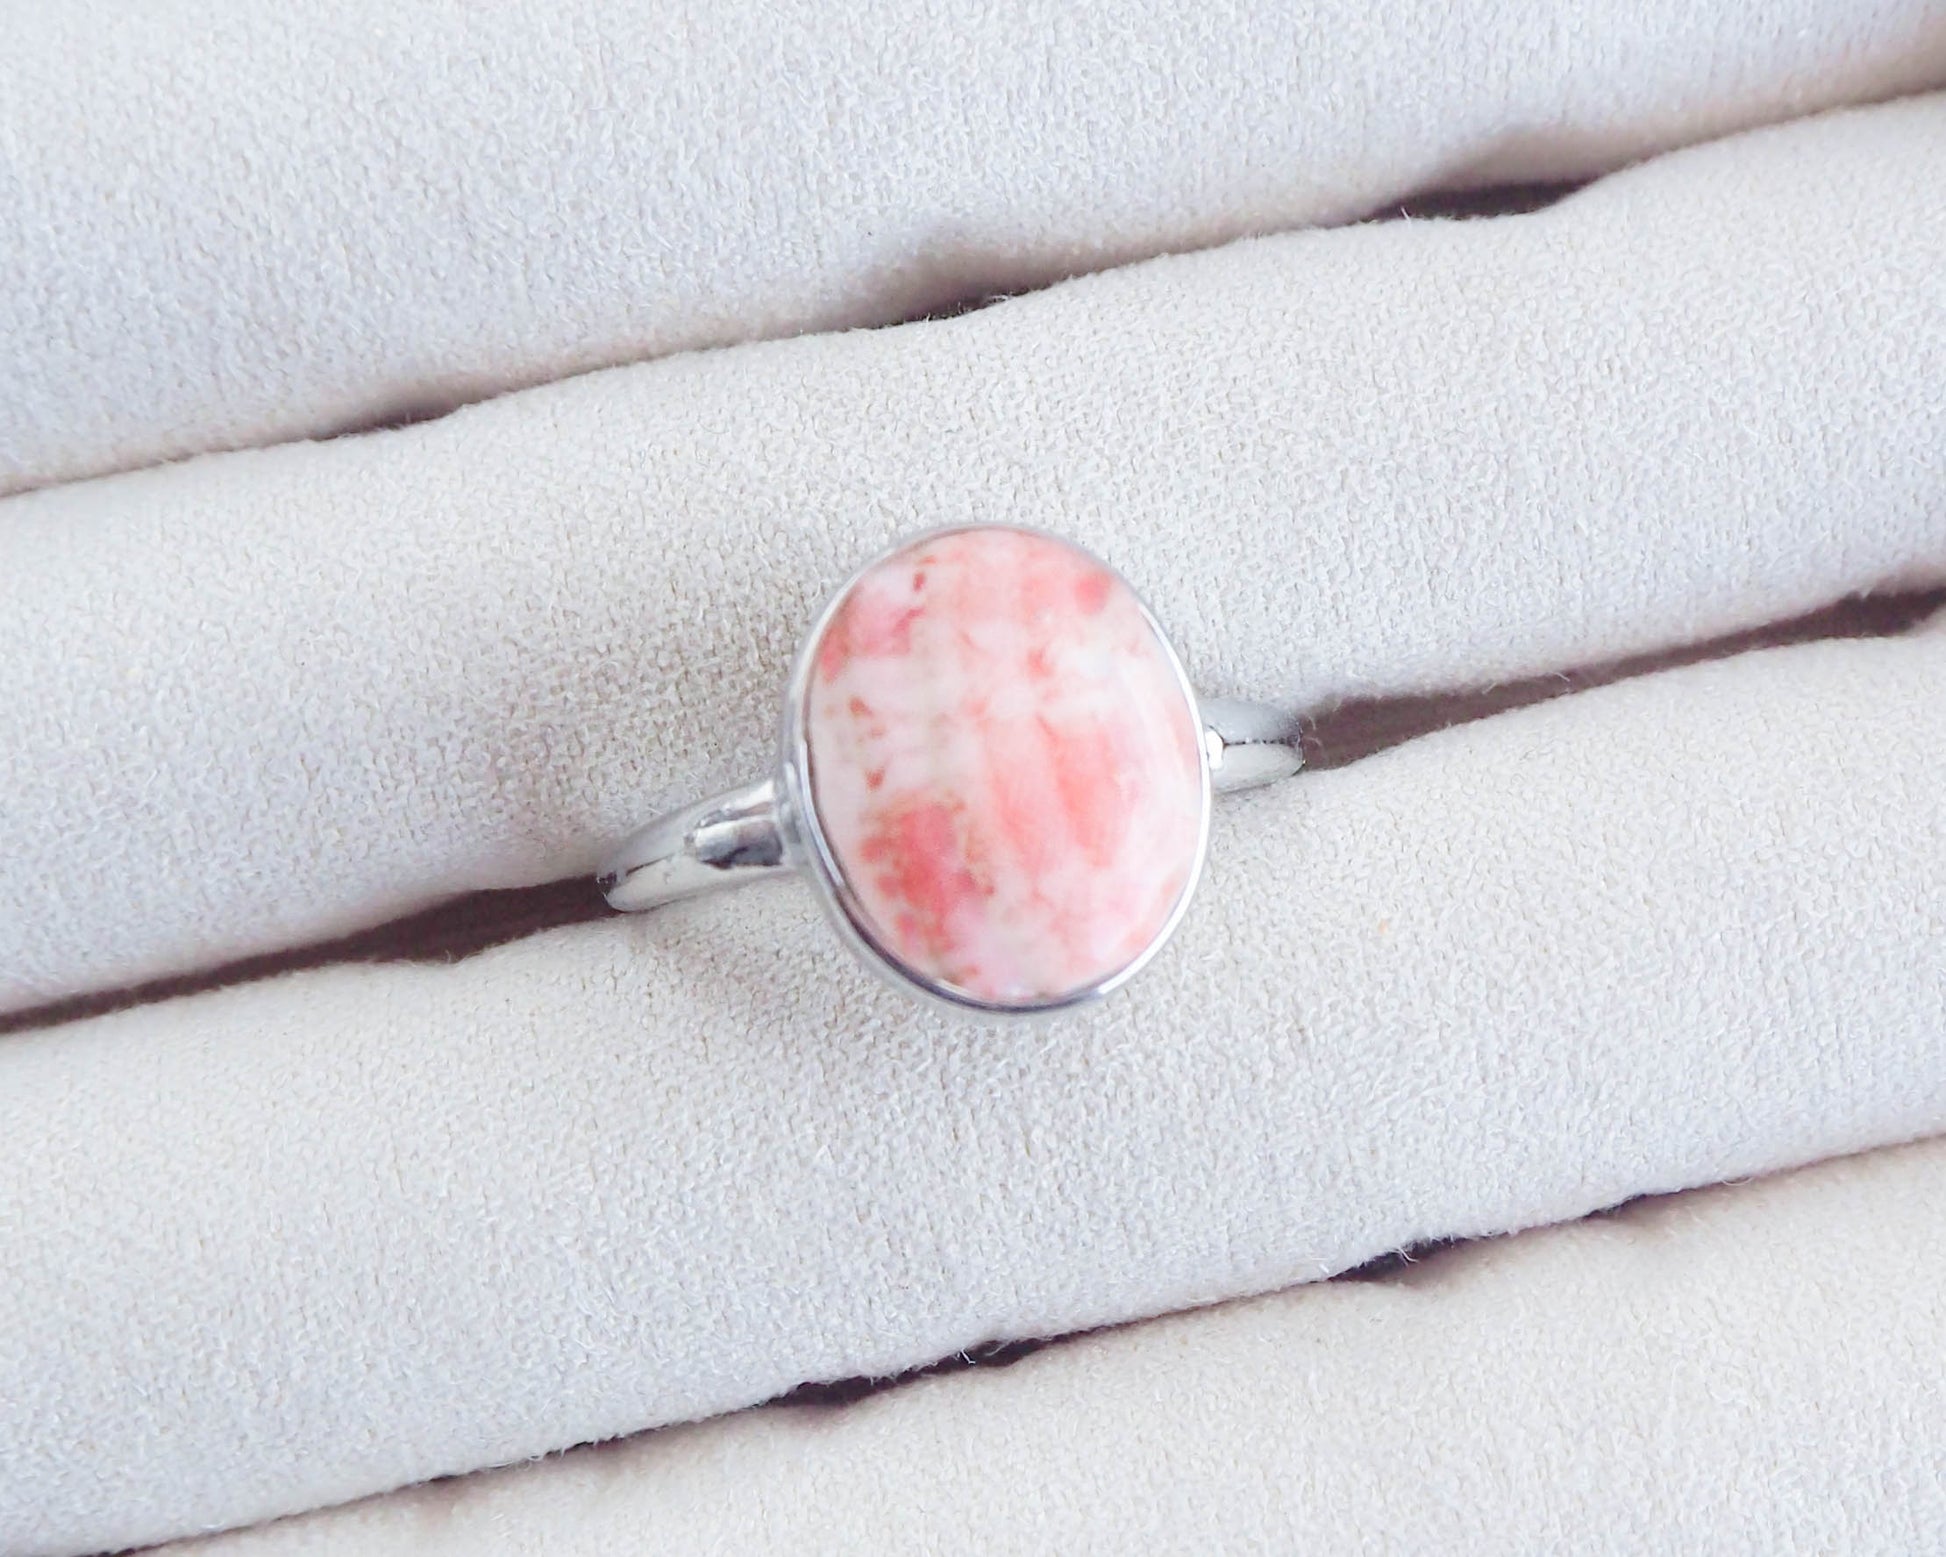 Pink Venus Shell Ring, adjustable ring on display, Real Seashell ring, Shell from Portugal, Coastal Jewellery, Beach Girl, SeabyLou